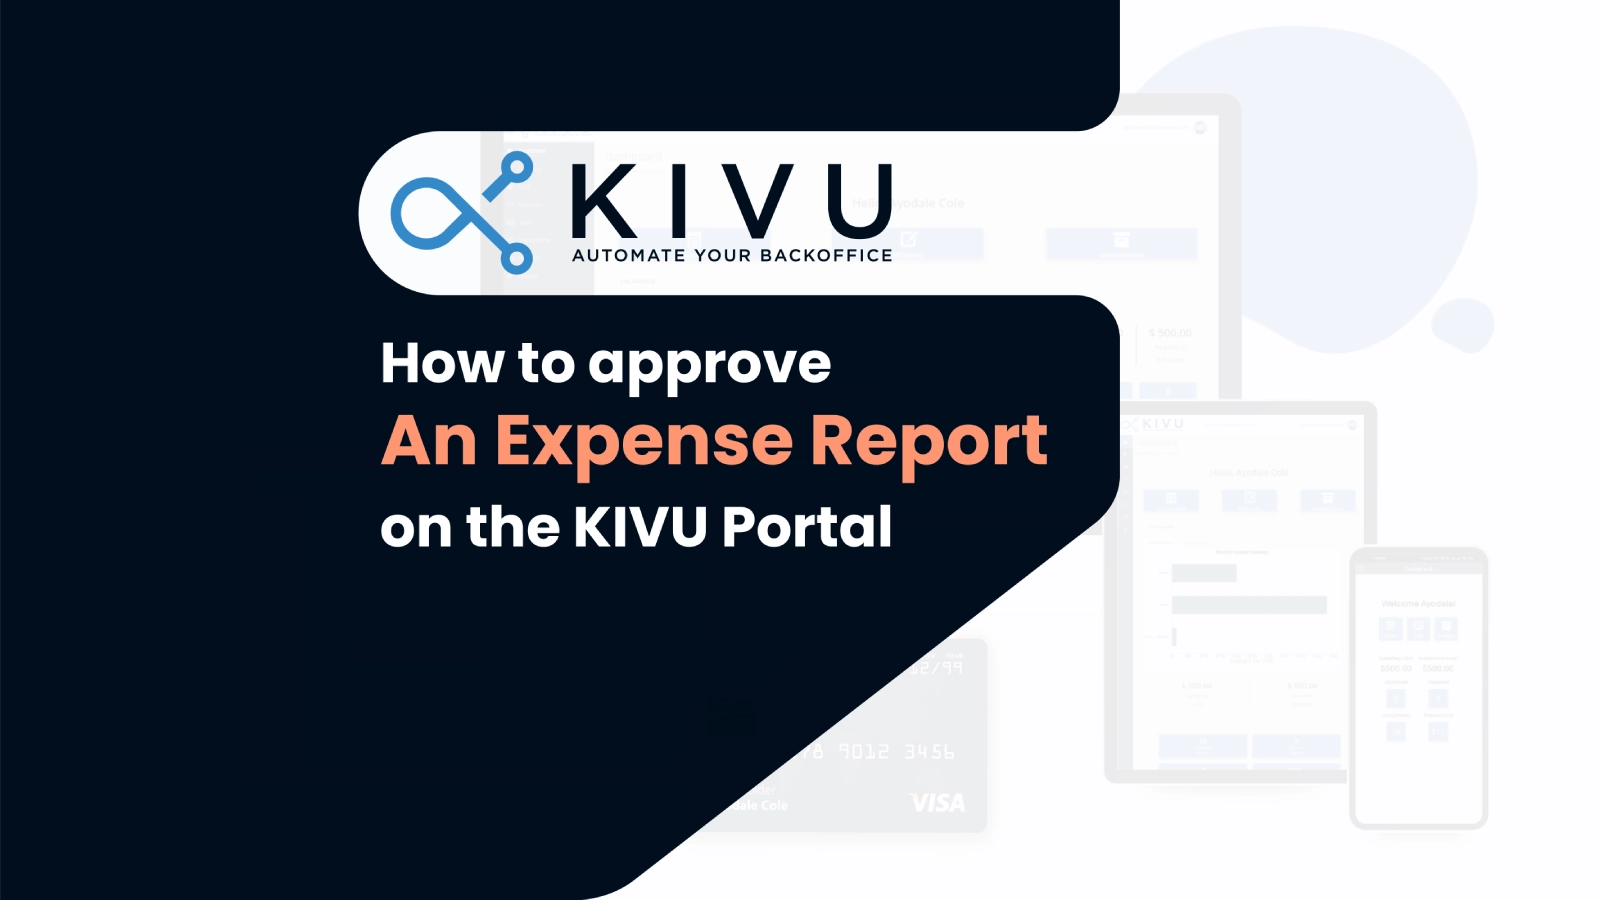 How to approve an expense report on the KIVU Expense Portal